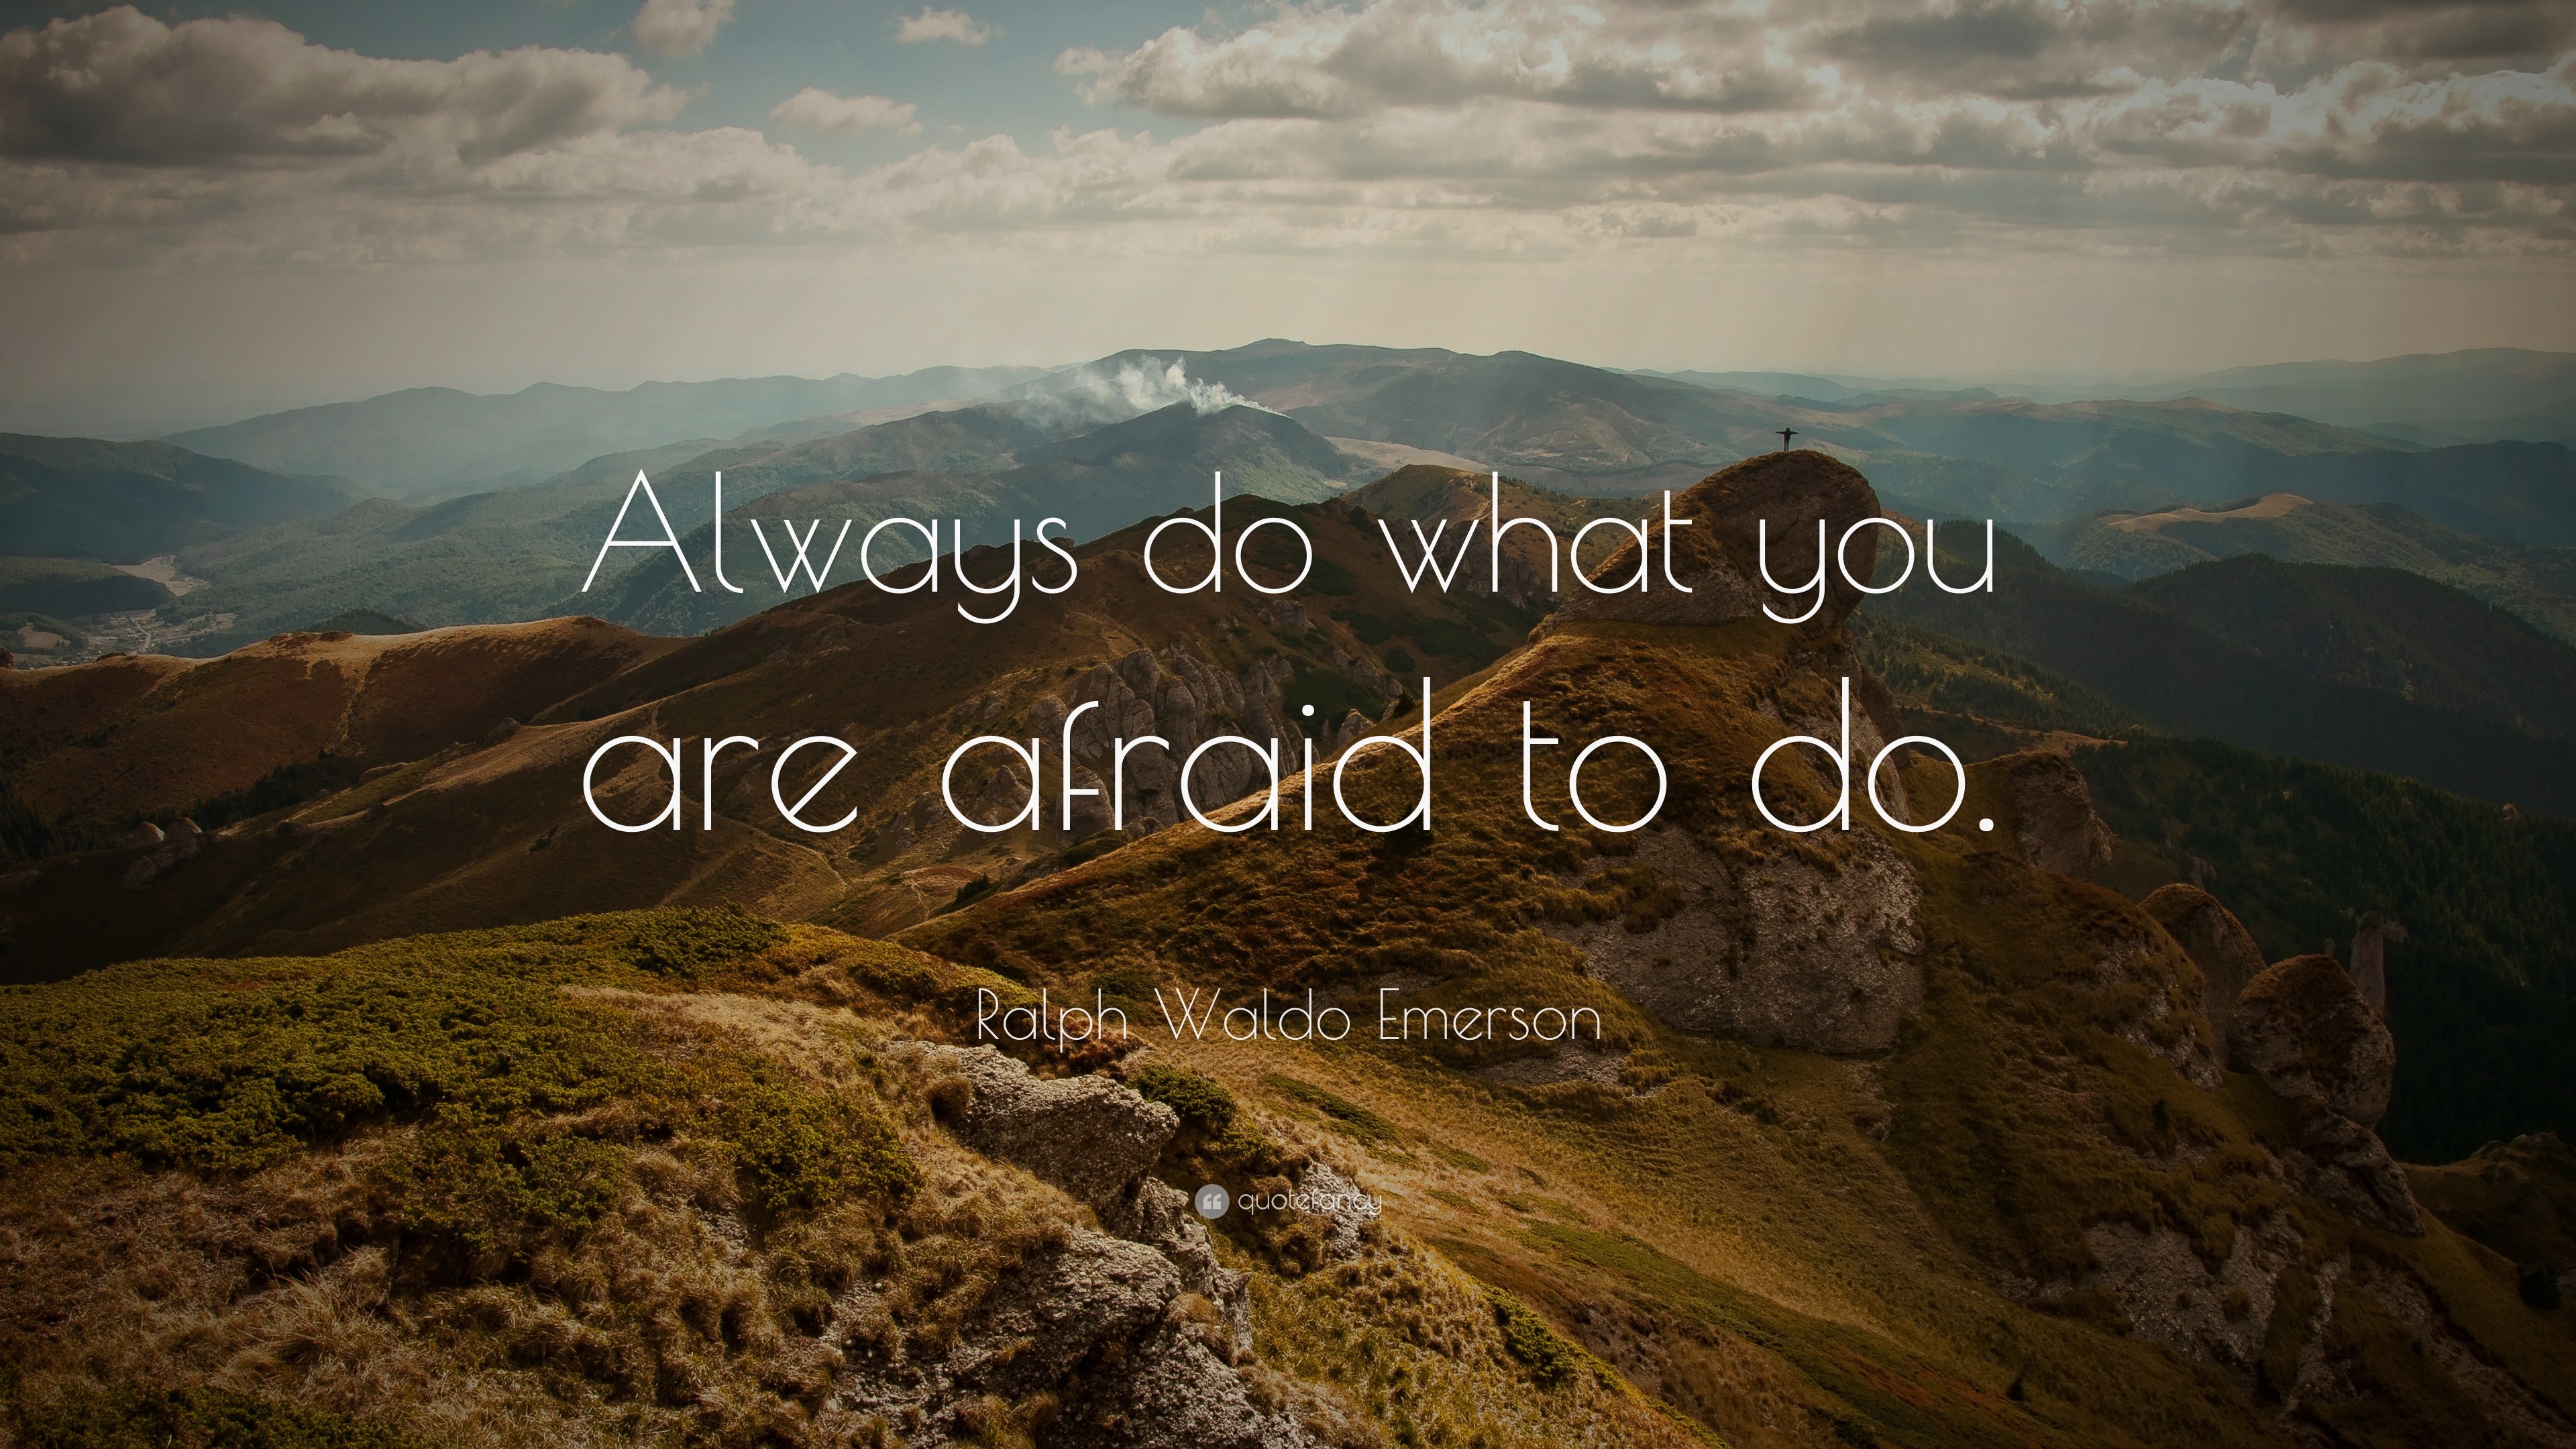 Ralph Waldo Emerson Quote: “Always do what you are afraid to do.”